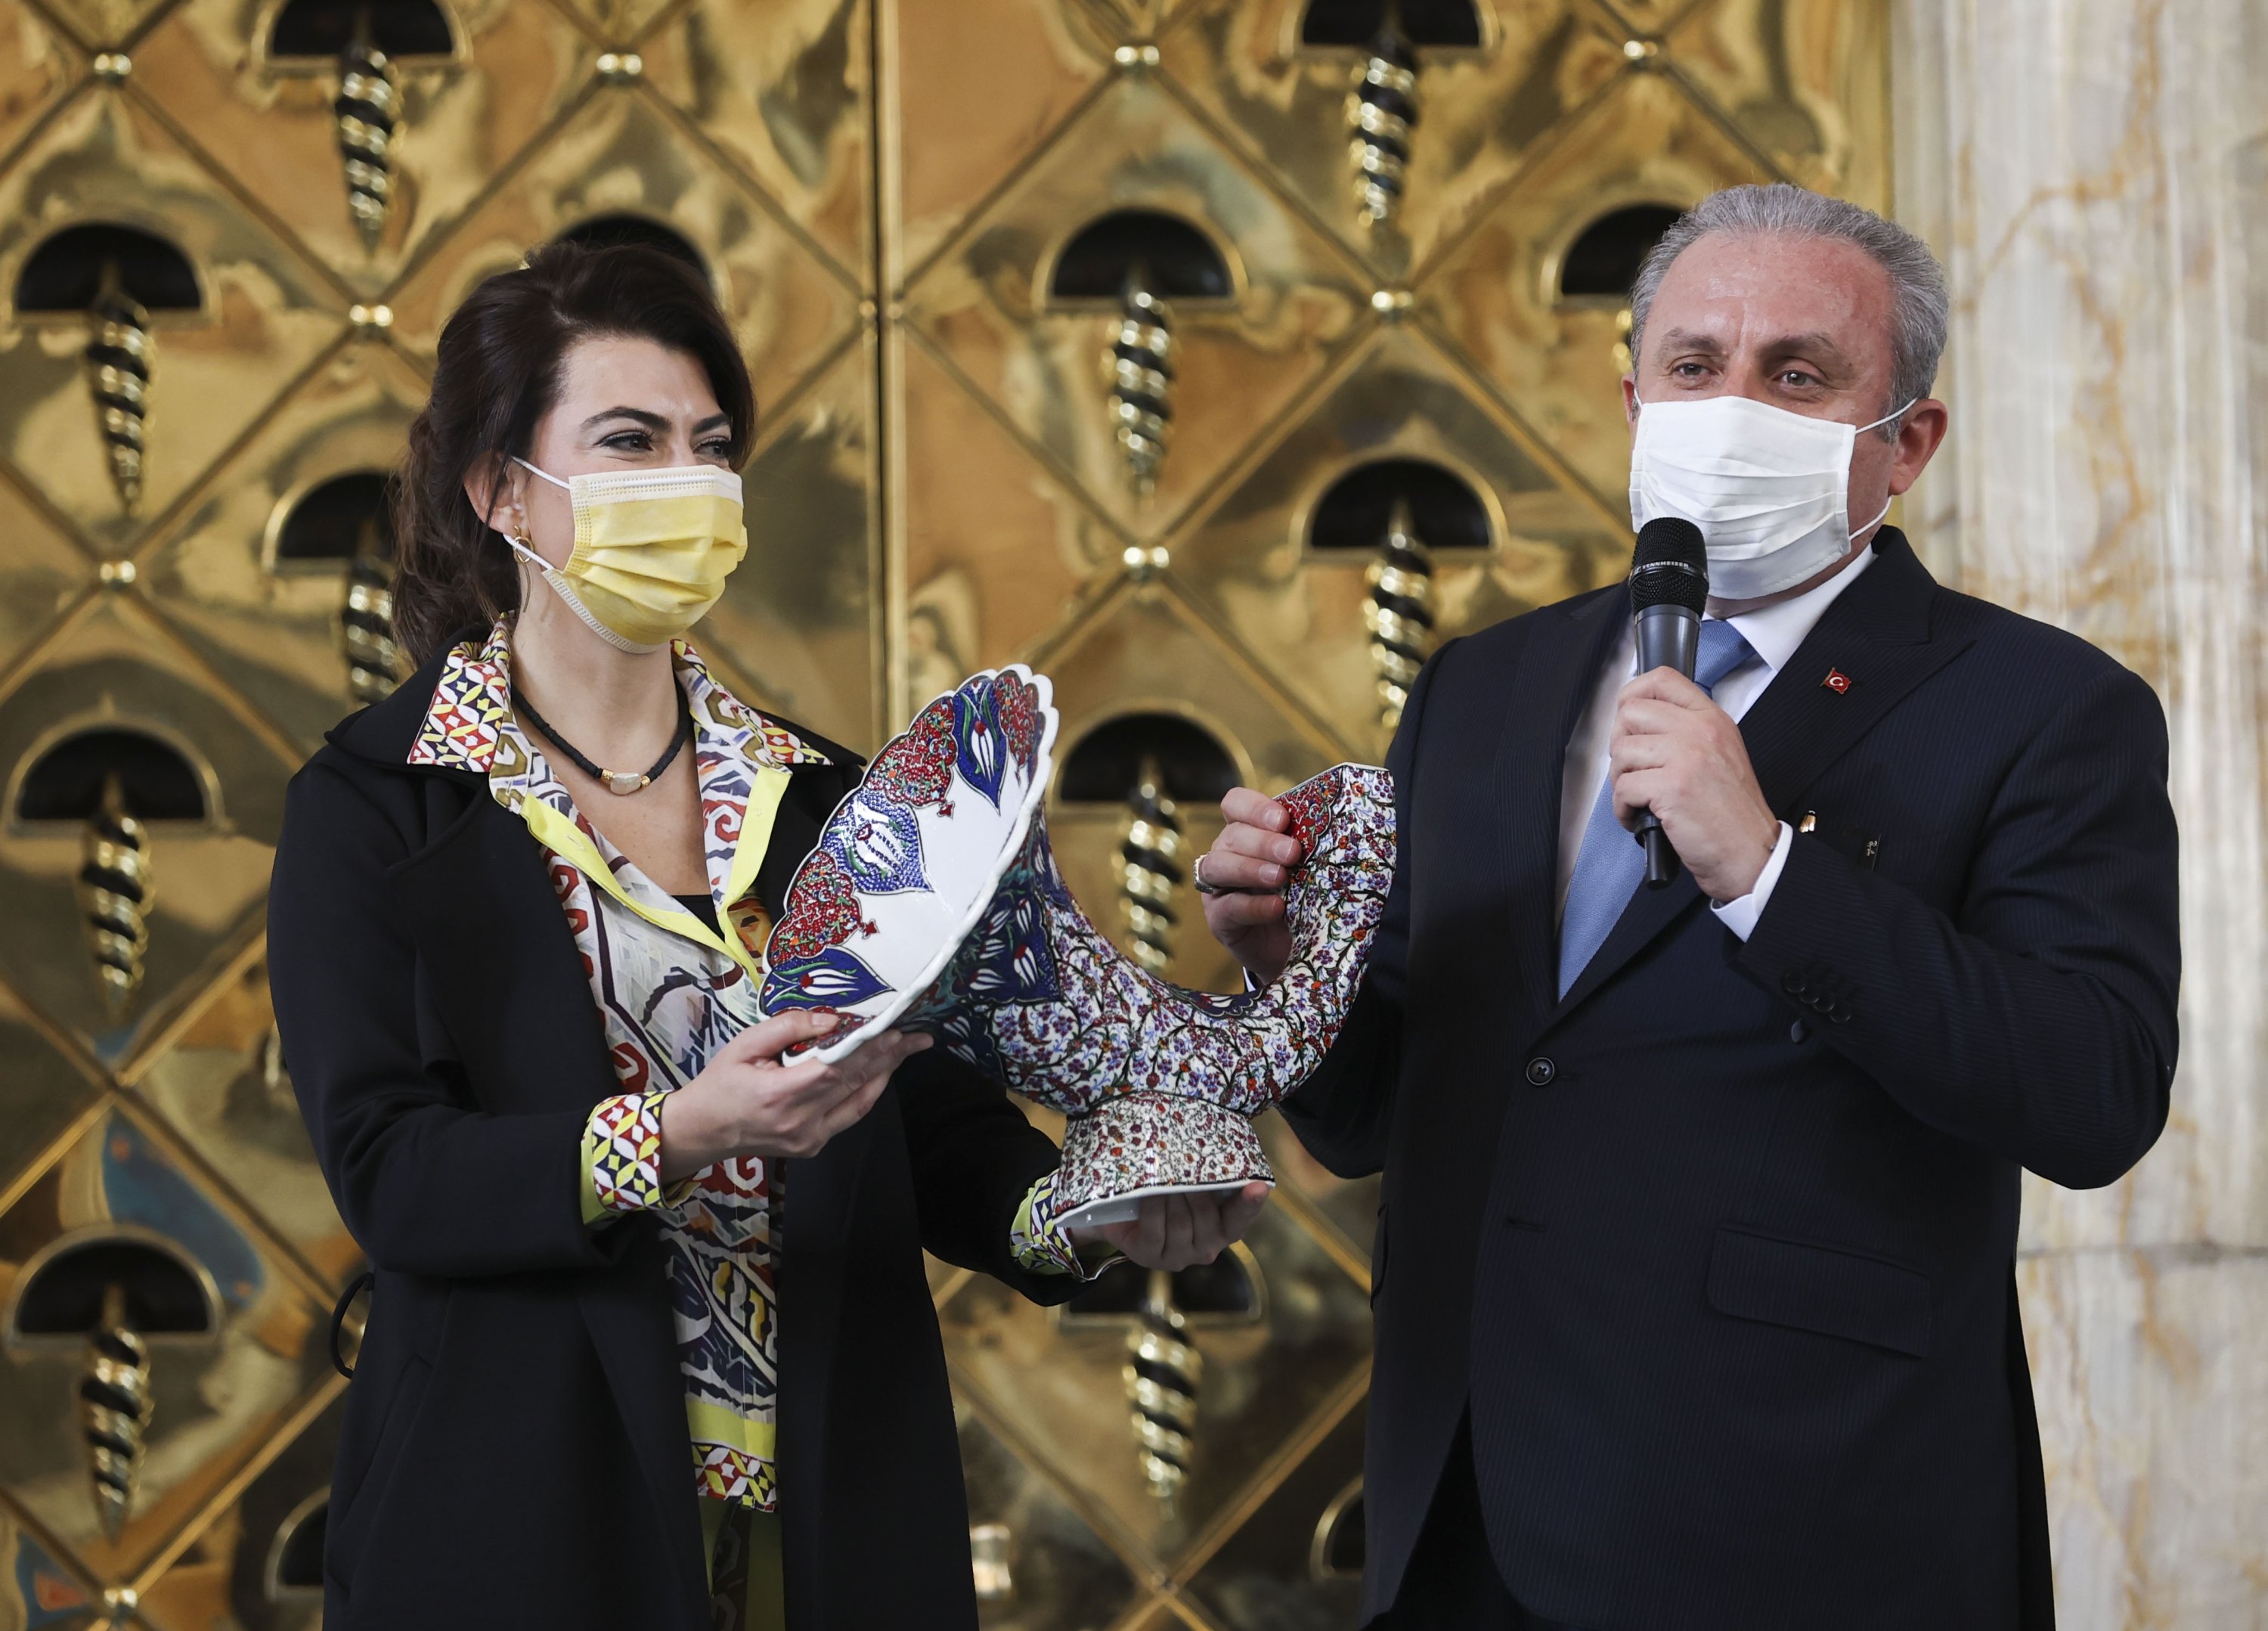 Tile artist Nida Olçar (R) presents a tile acoustic gramophone to Parliament Speaker Mustafa Şentop at the “Parliament Private Kütahya Collection Sıtkı' exhibition in the Turkish Parliament’s Hall of Honor, Ankara, Turkey, March 17, 2021. (AA Photo)